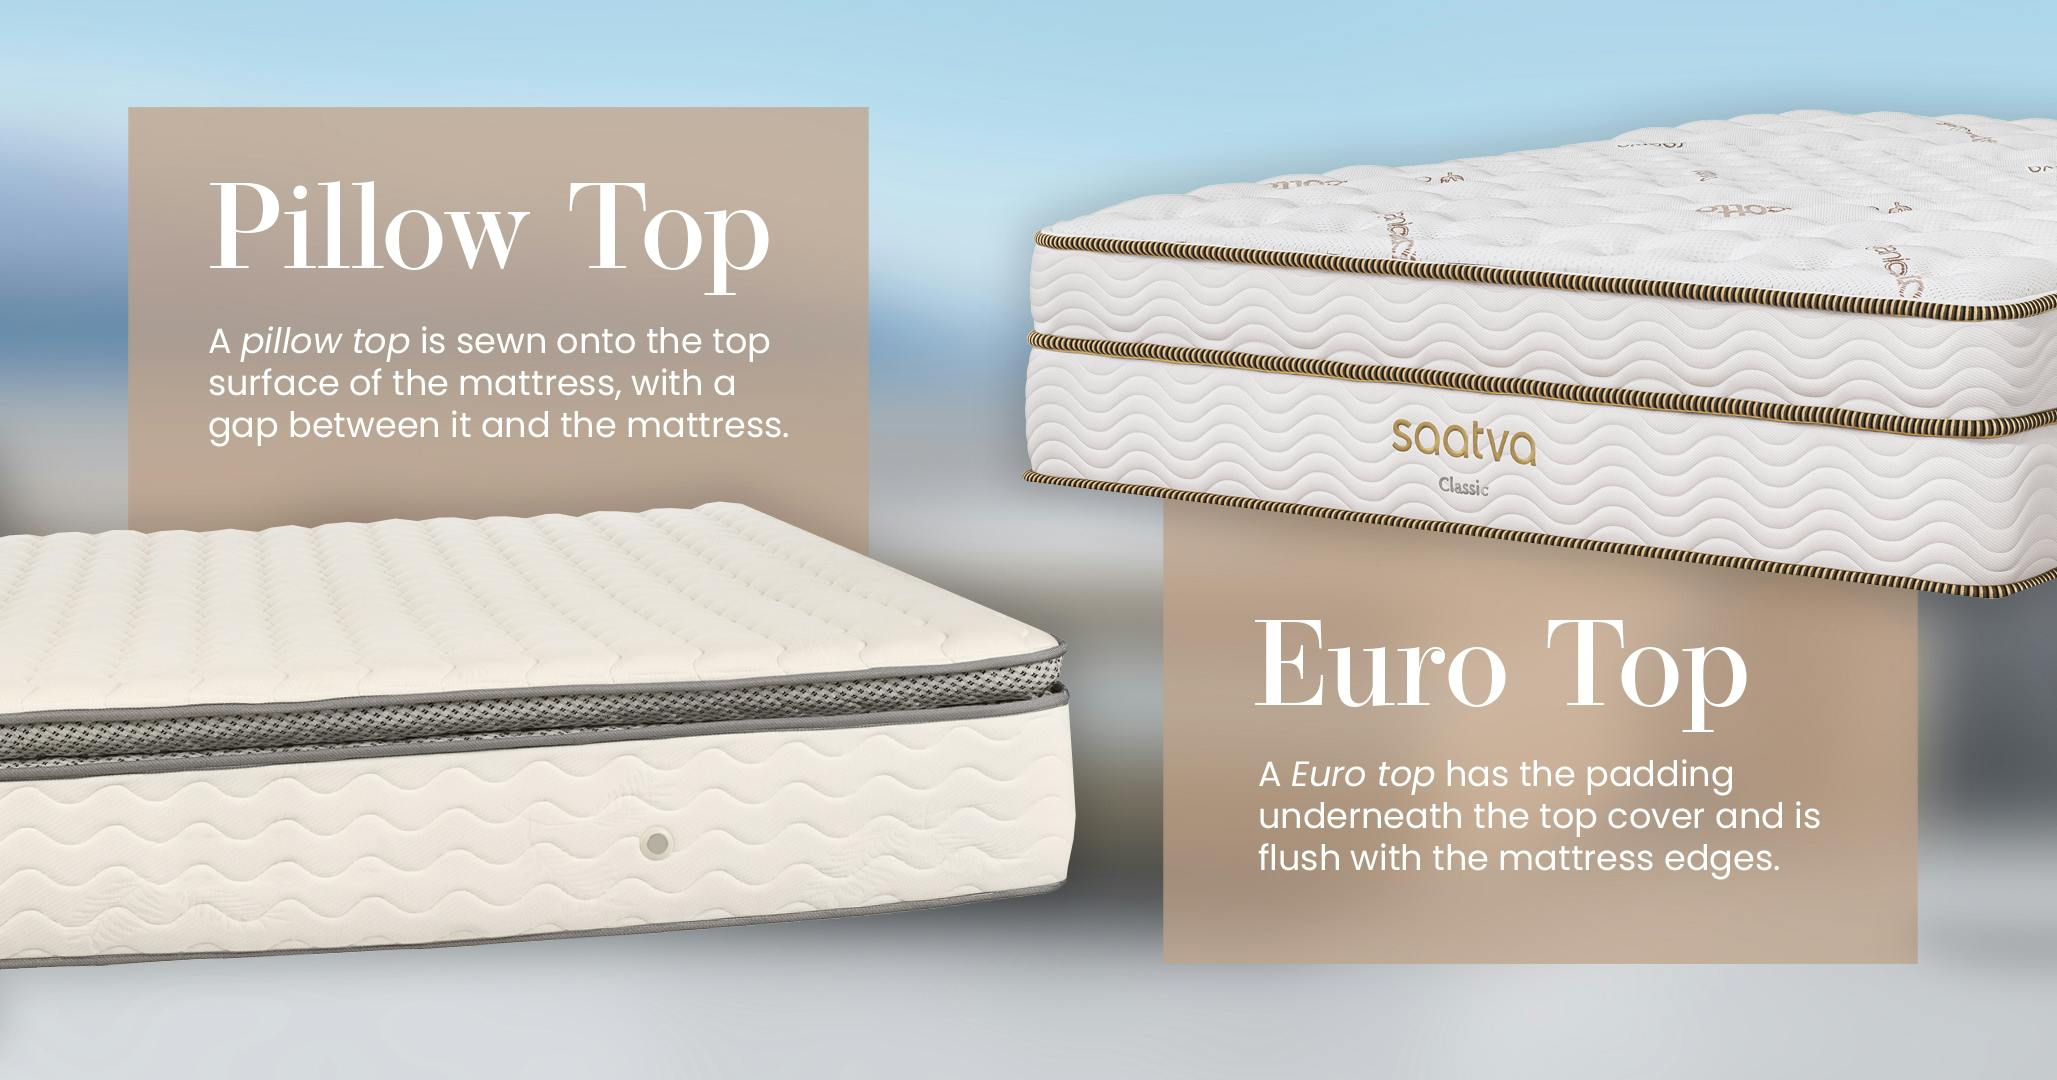 difference between euro top and pillow top mattress